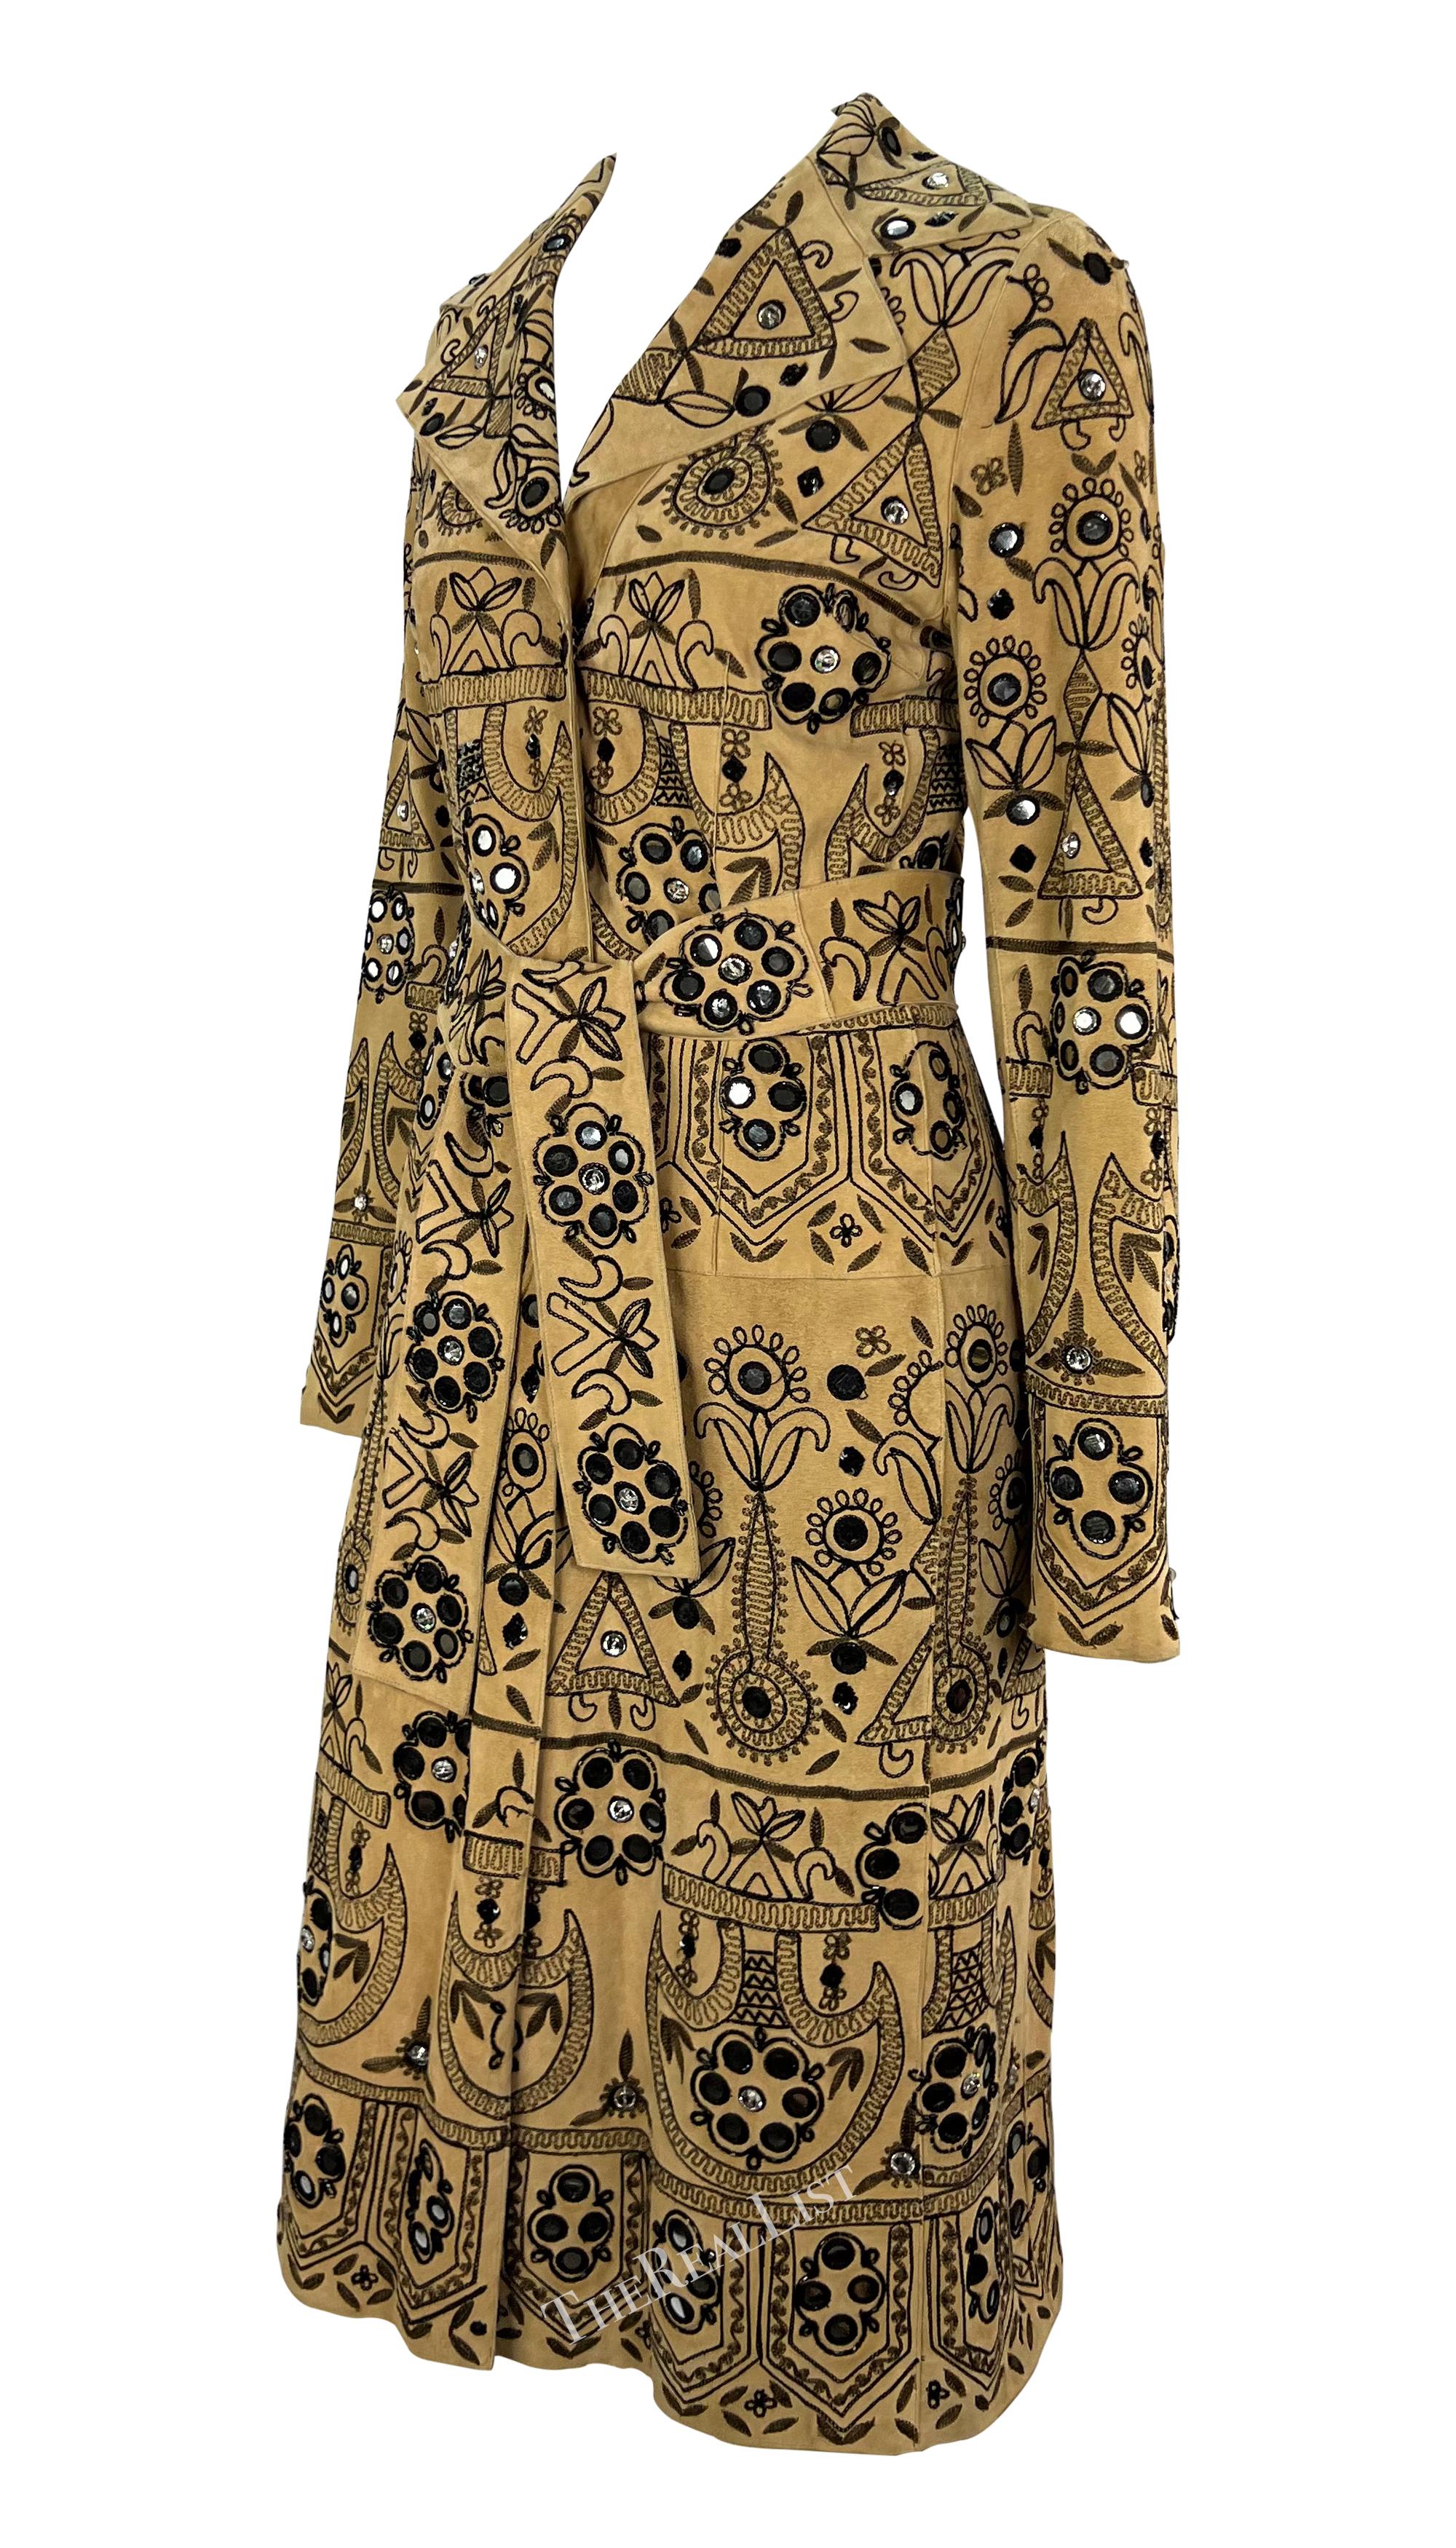 S/S 2001 Dolce & Gabbana Tan Suede Rhinestone Mirror Embroidered Trench Coat For Sale 8